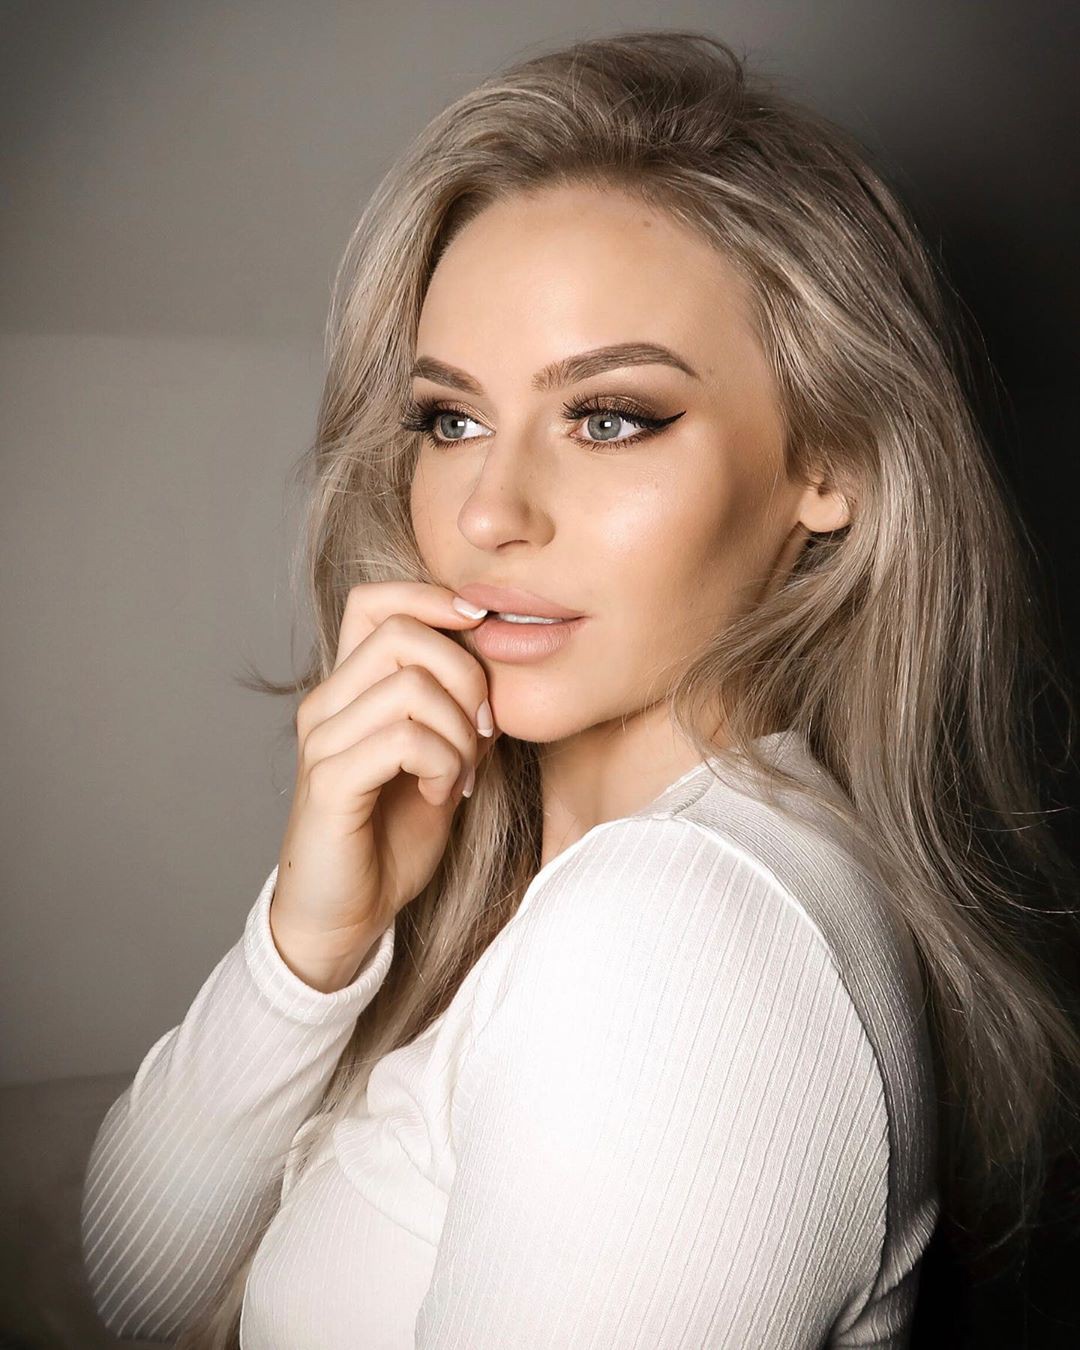 Anna Nystrom Instagram Pictures, Anna Nystrom, Like button: Anna Nystrom  